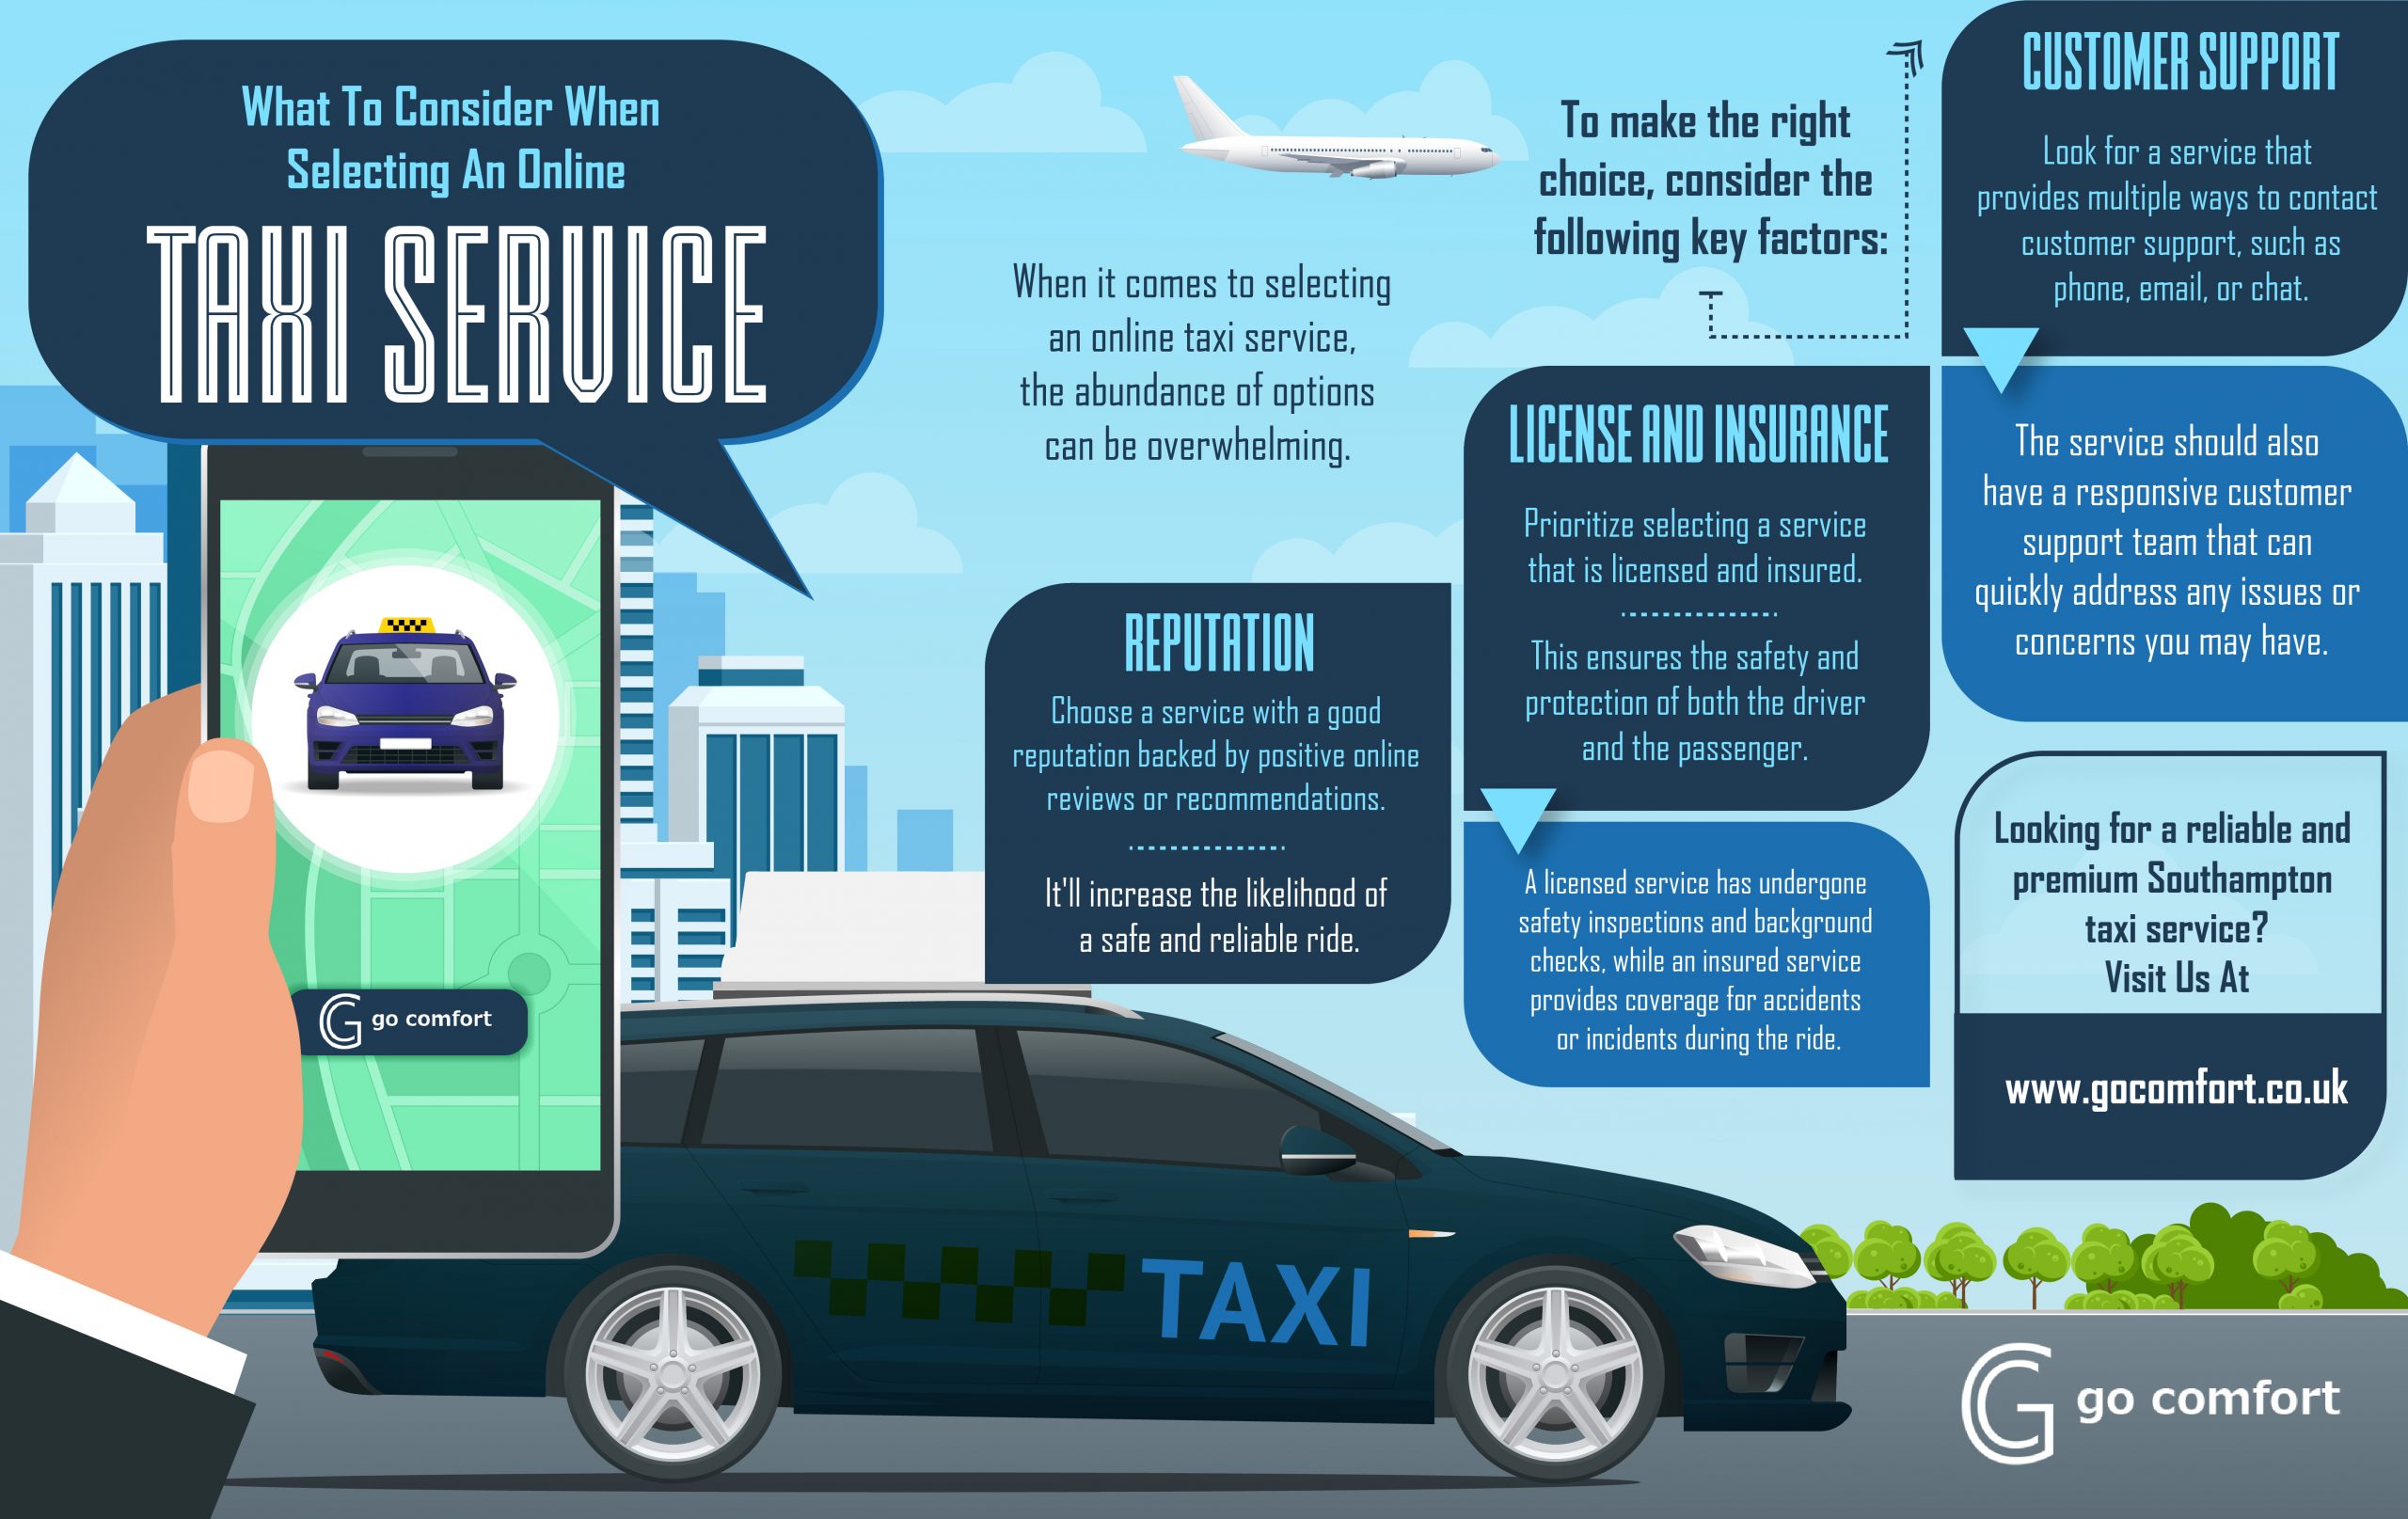 What To Consider When Selecting An Online Taxi Service